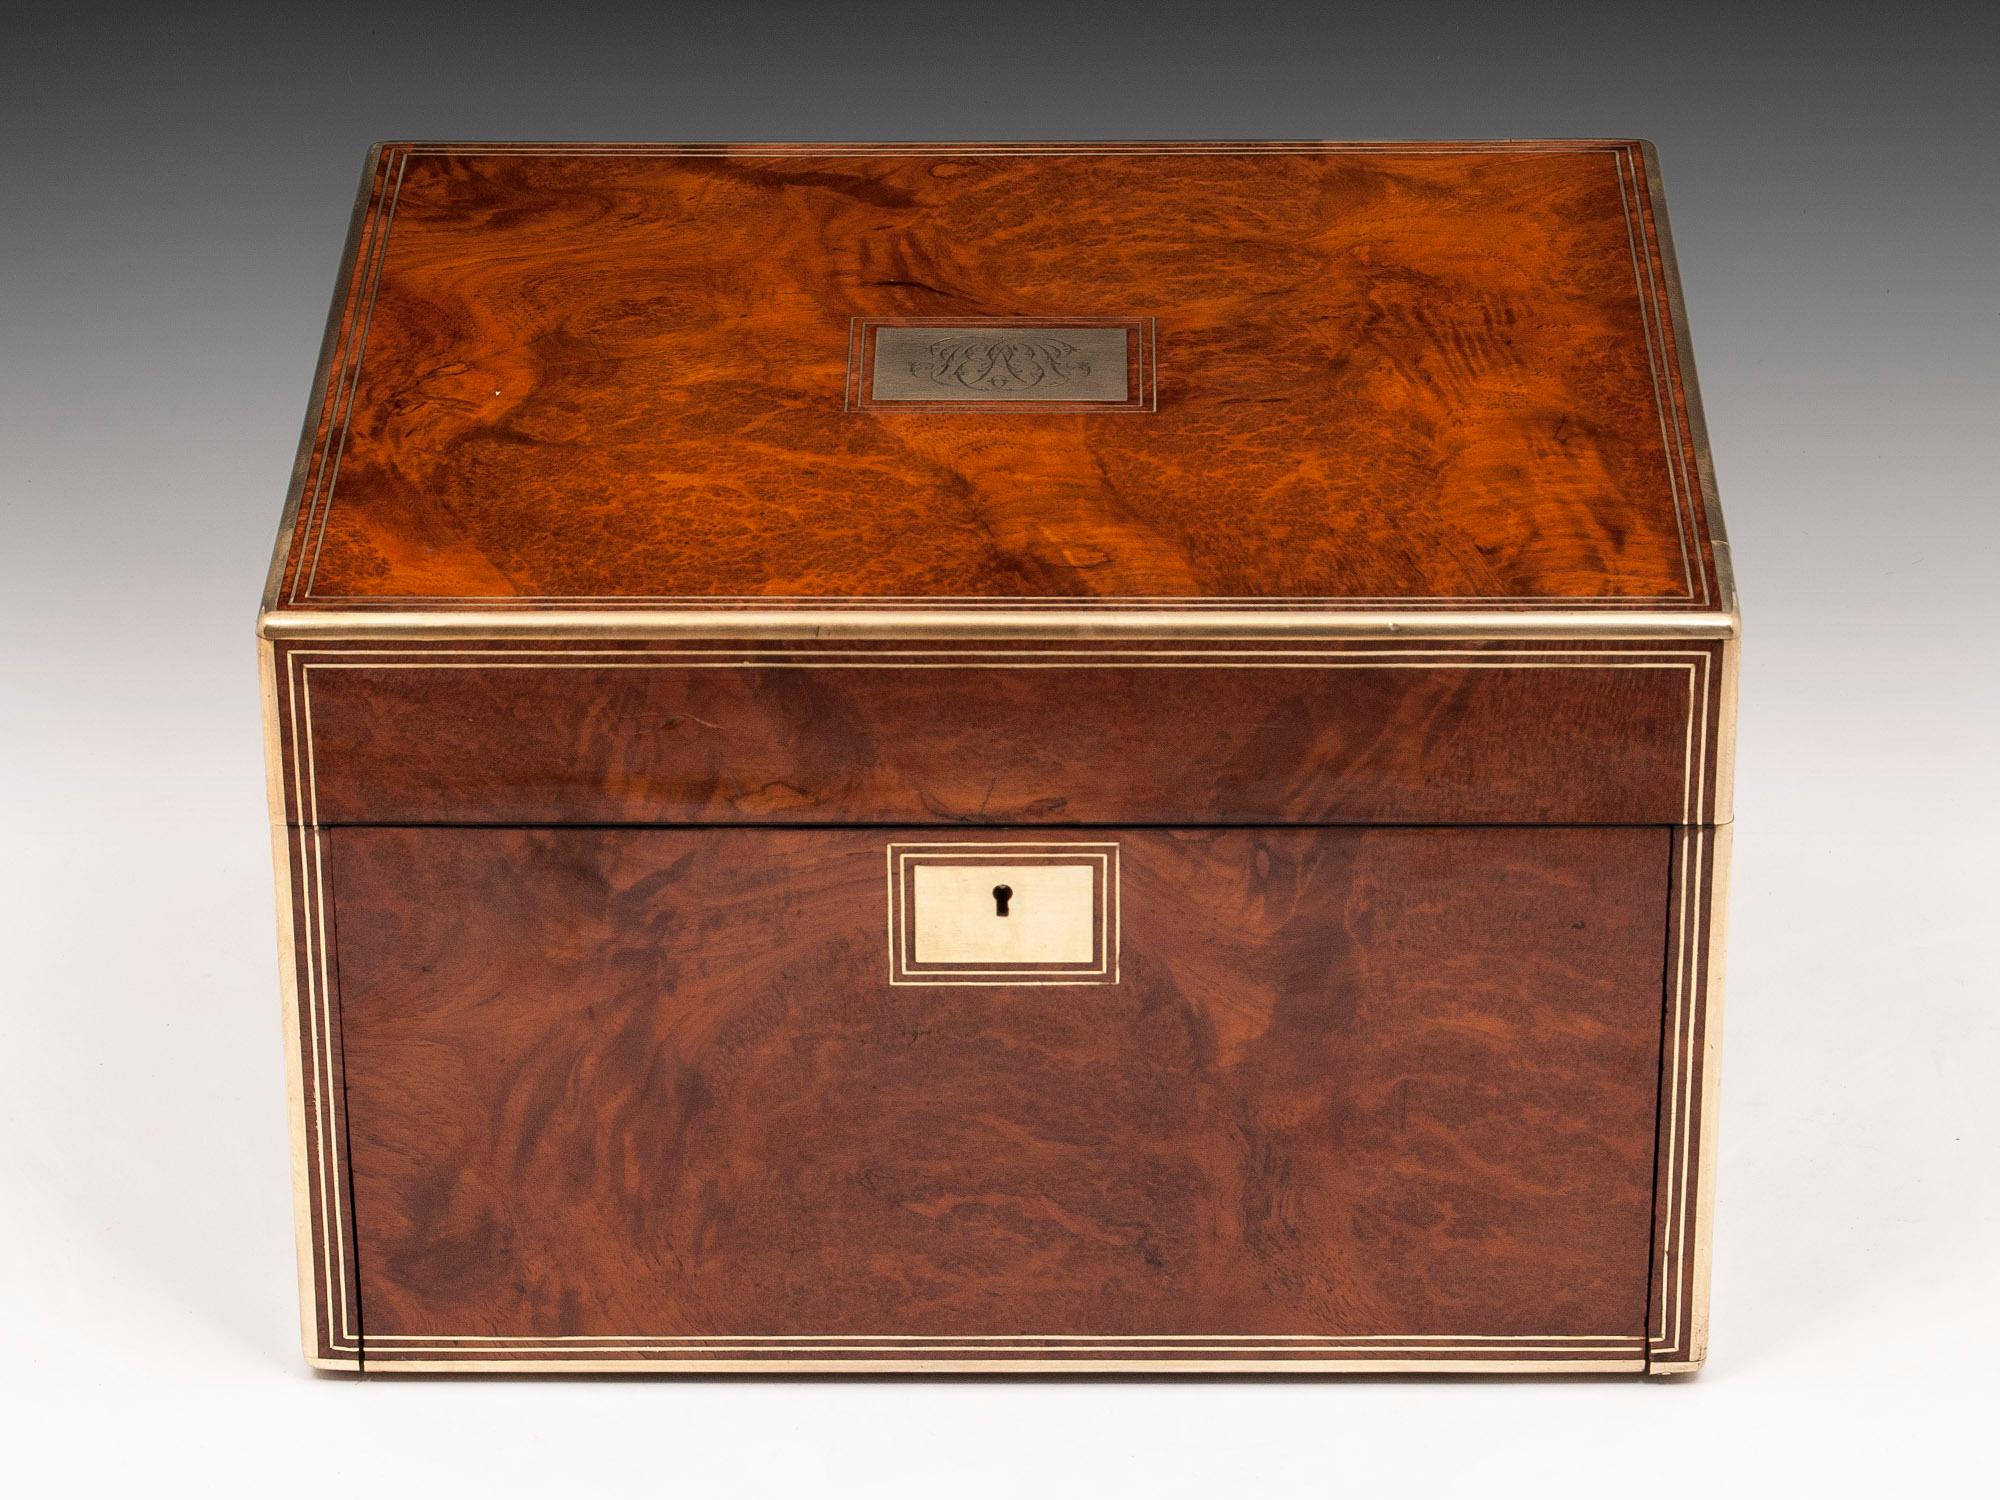 This magnificent silver gilt vanity box is veneered in stunning Amboyna.

Quadrant brass edging is on the box, along with escutcheons, stringing, and a makers label 